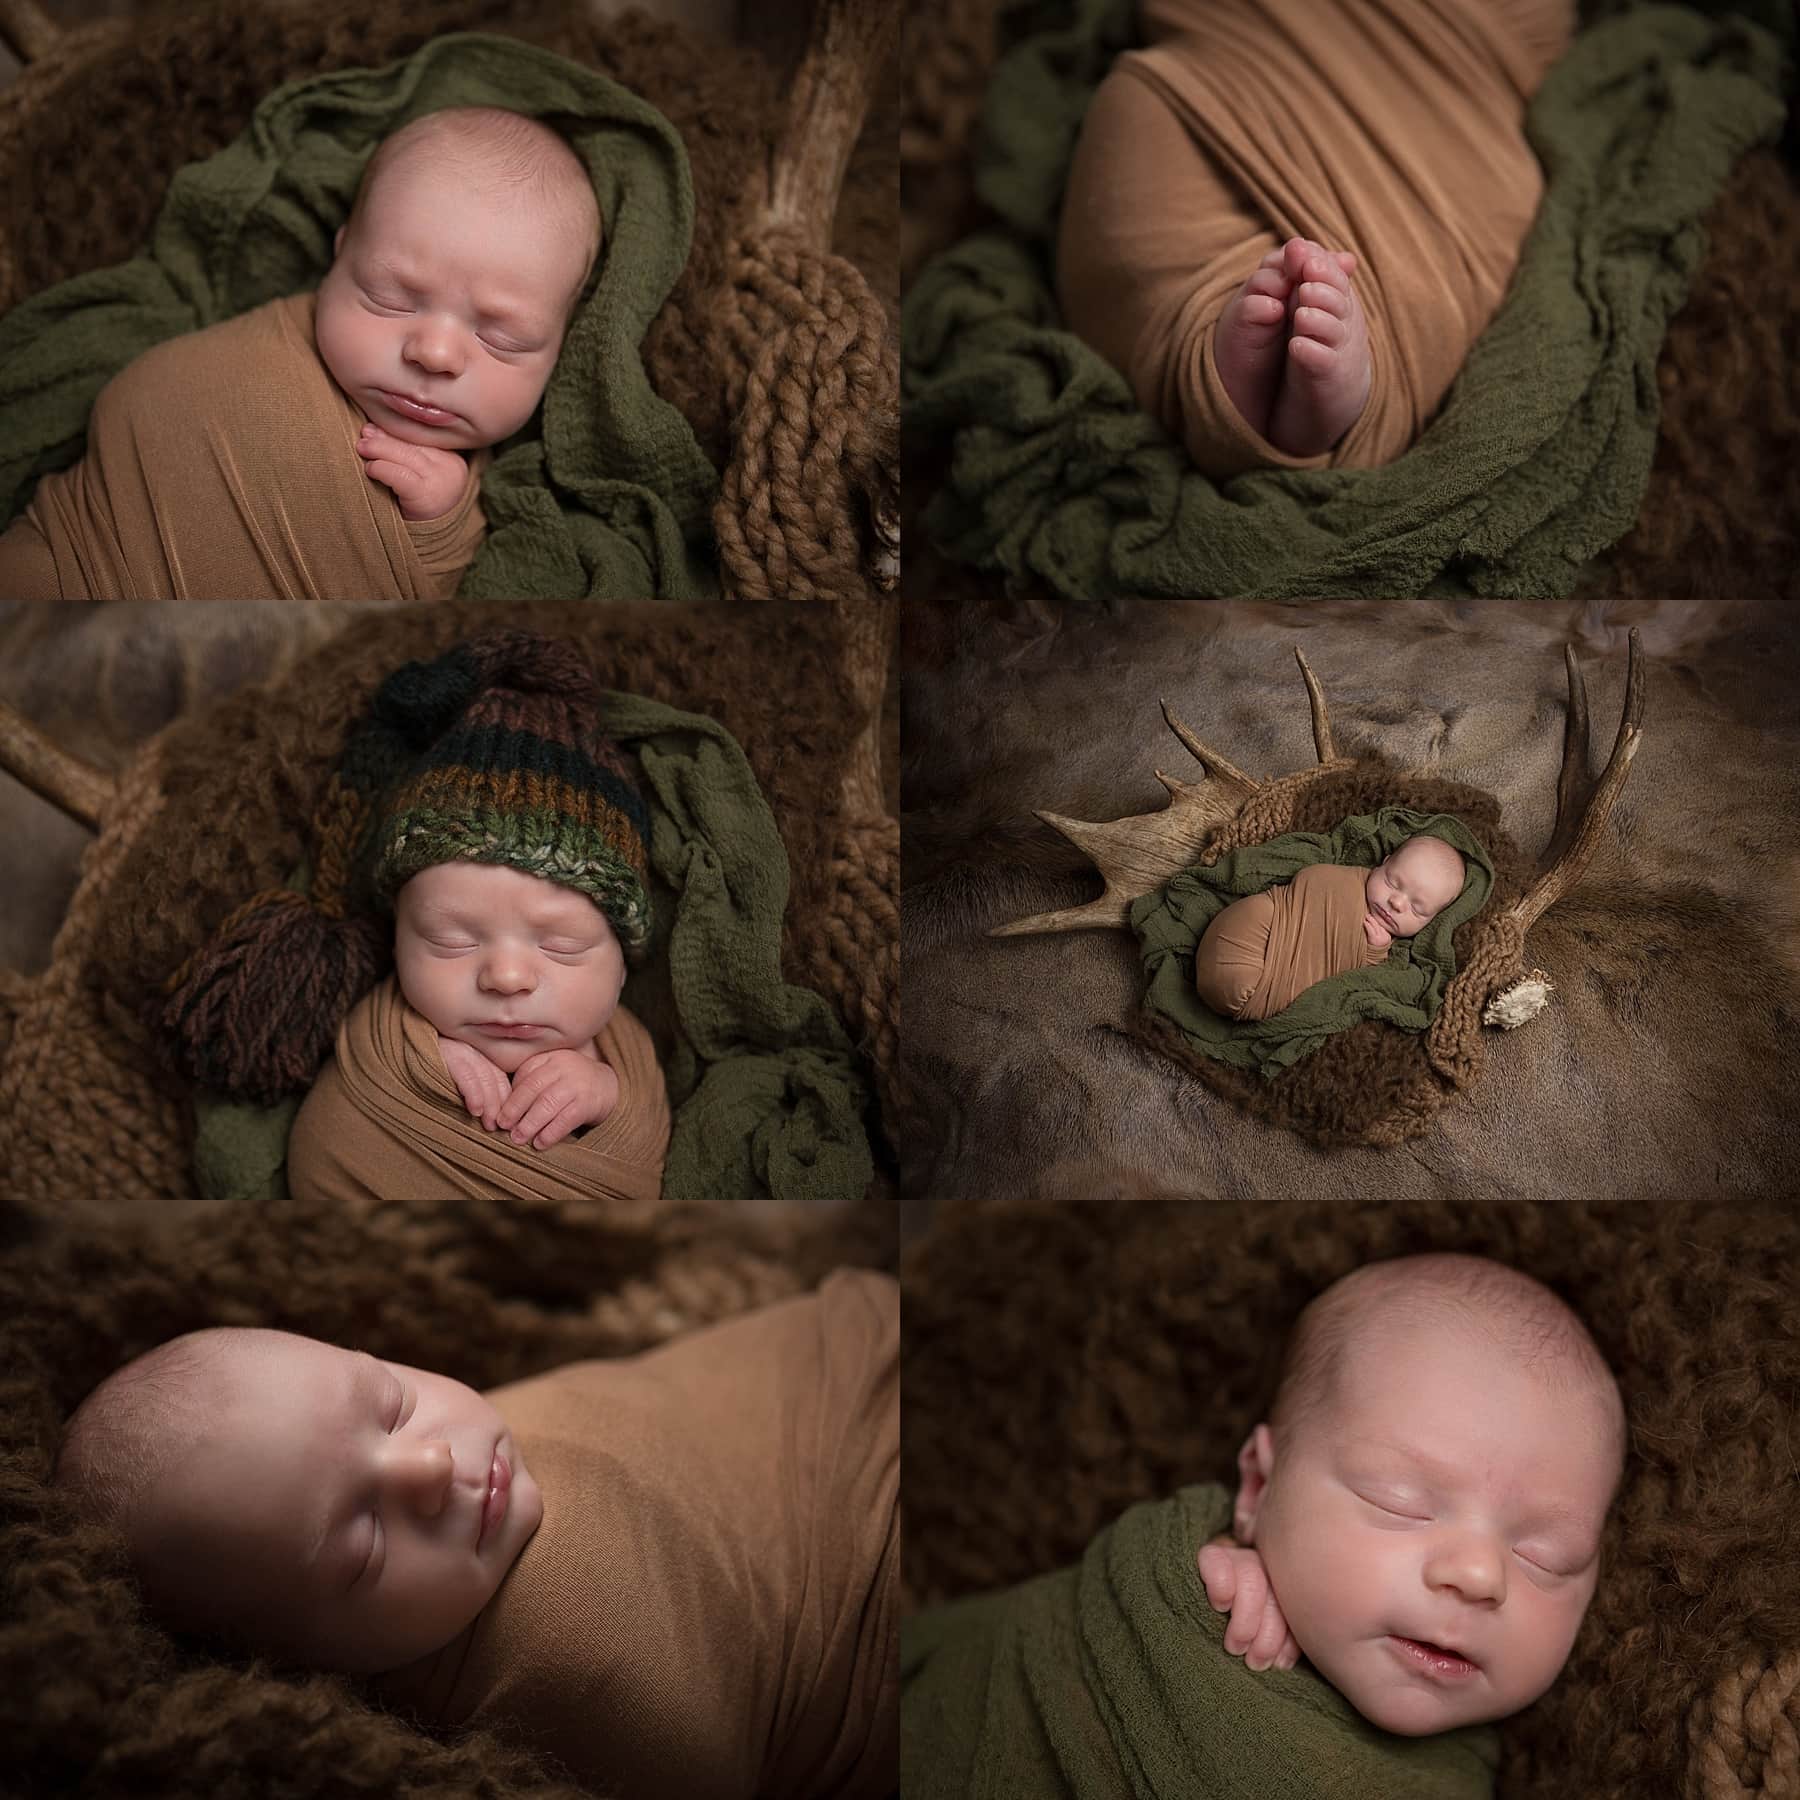 A series of photos of a baby sleeping in a green hat.